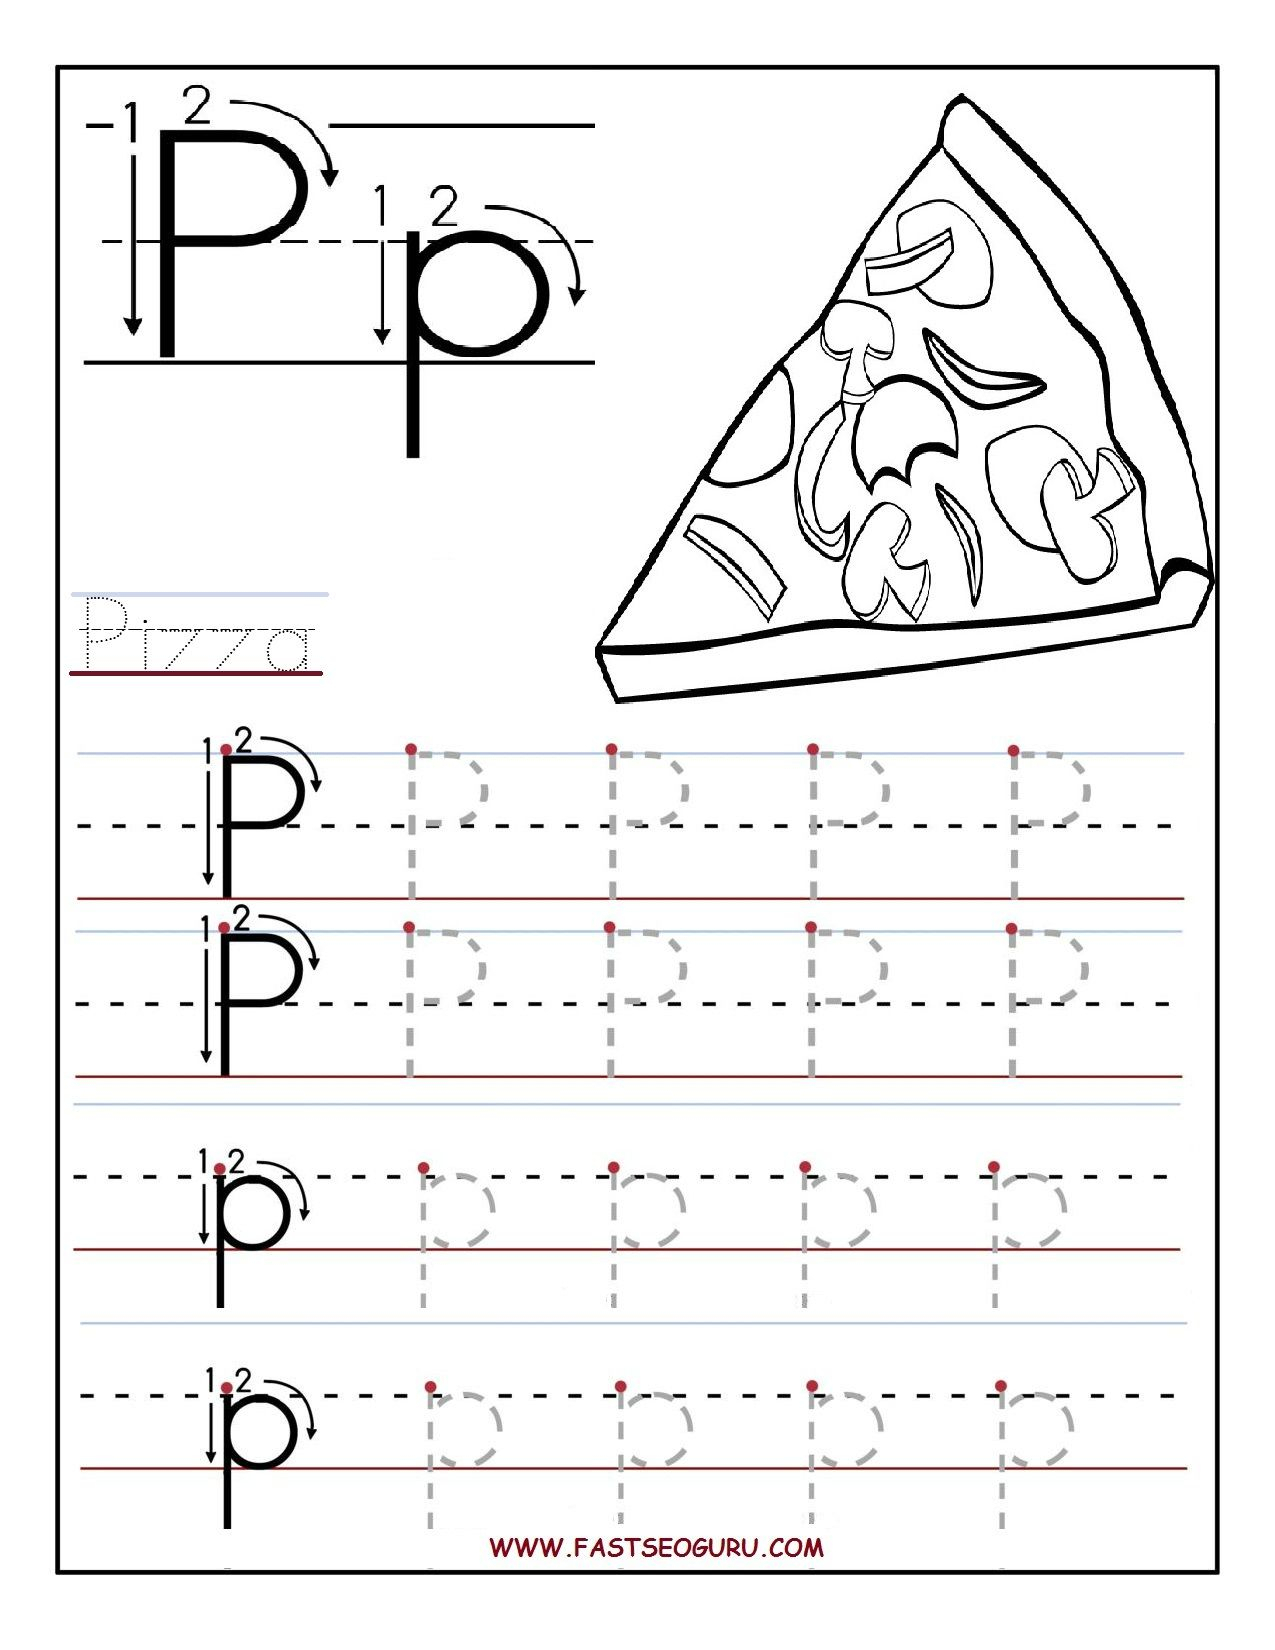 Printable Letter P Tracing Worksheets For Preschool regarding Letter P Tracing Printable